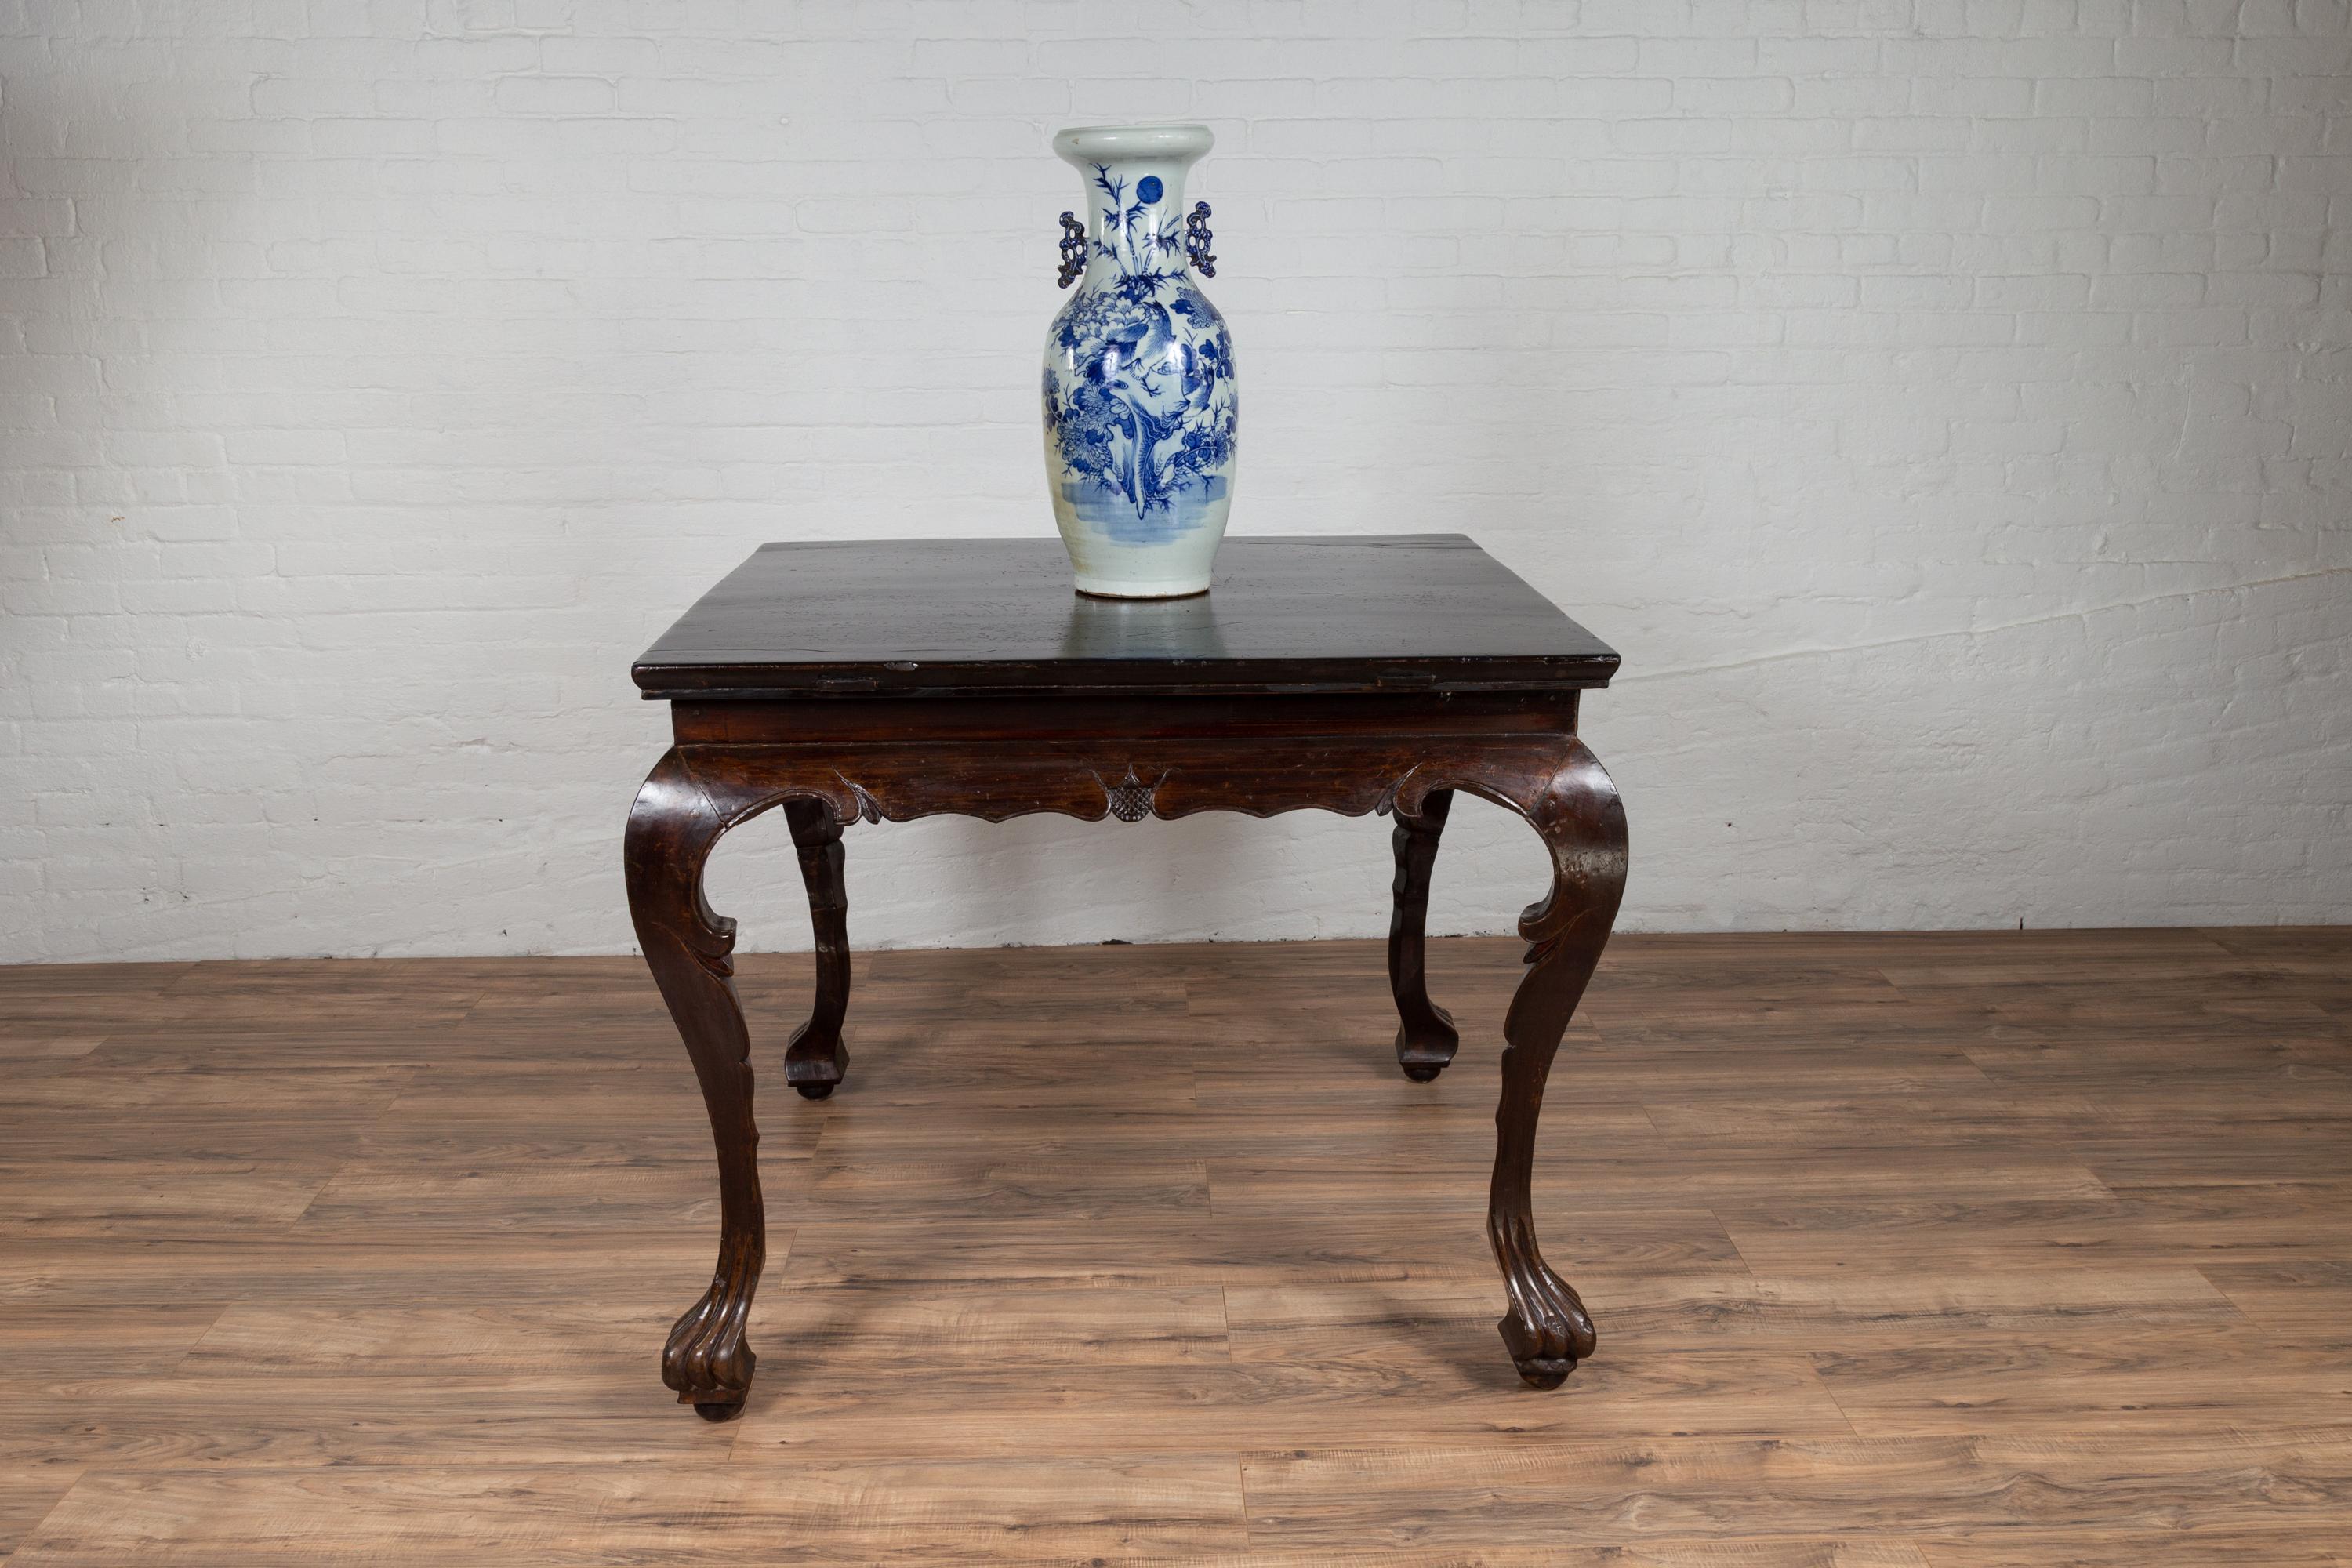 A Chinese antique center hall table from the early 20th century, with black lacquered top and brown stained legs. Born in China during the early years of the 20th century, this lovely center table features a black lacquered rectangular top with